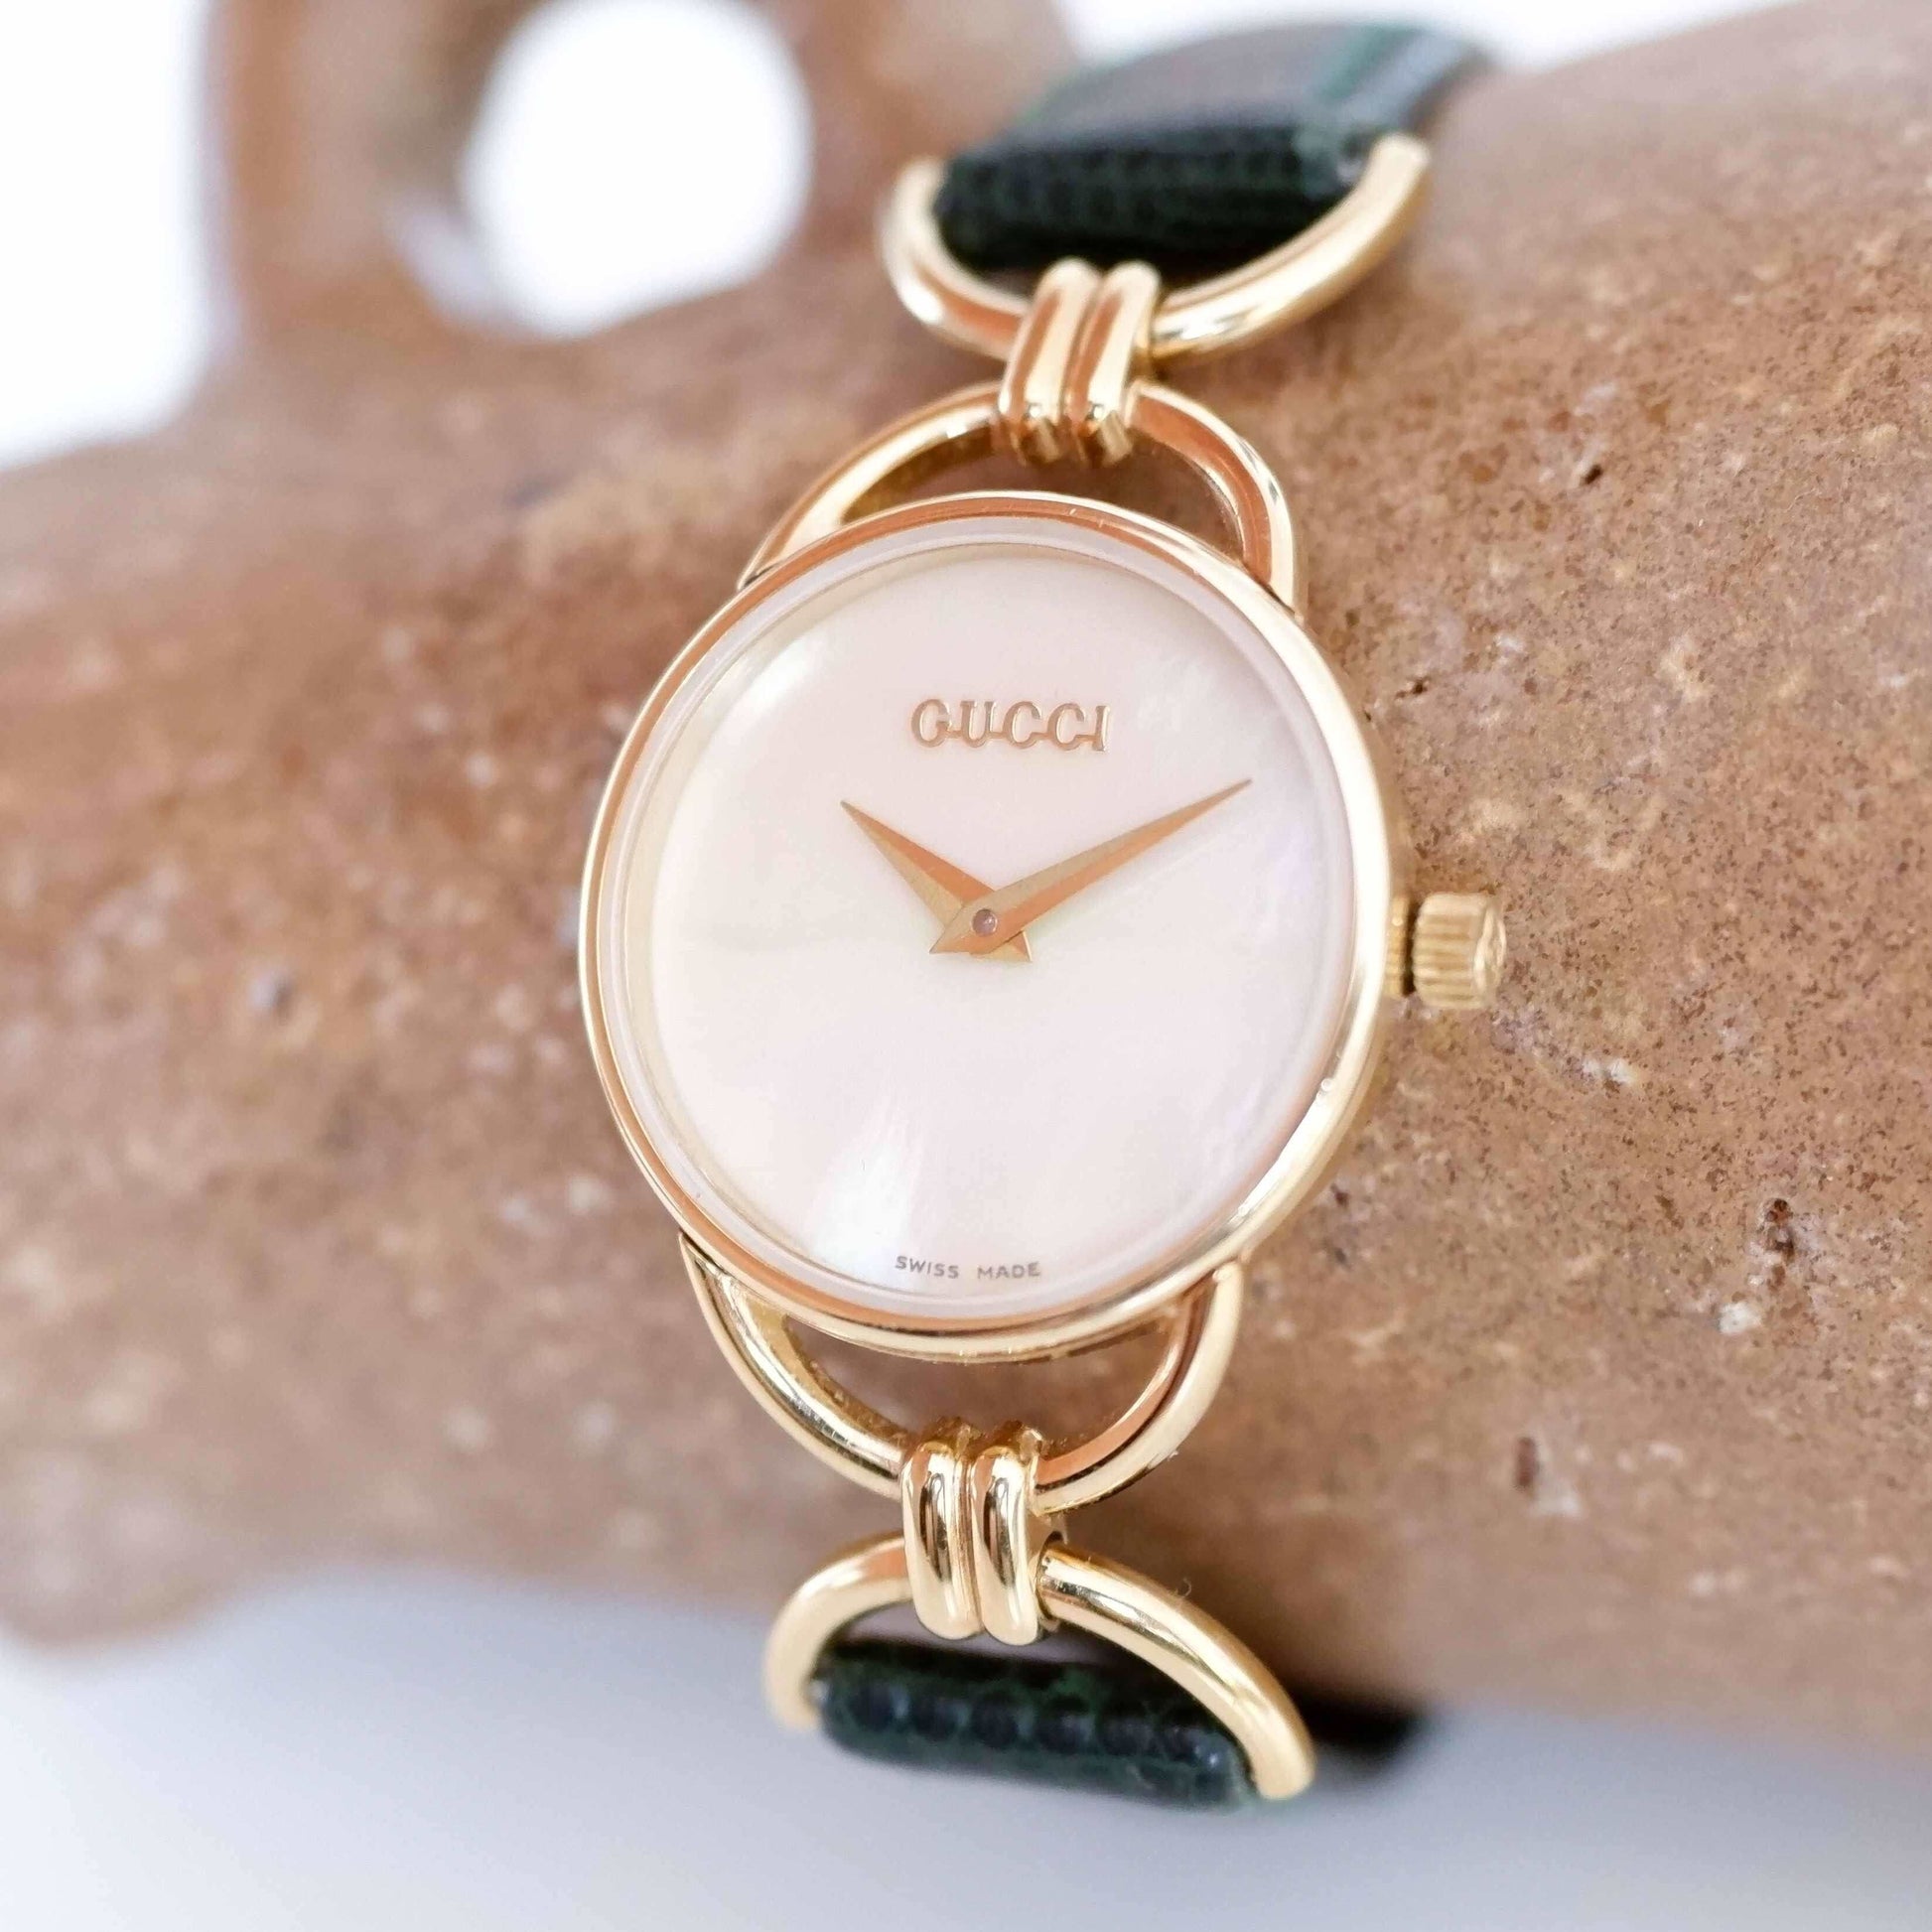 Gucci 6000.2.l Vintage Ladies Watch: 90s Gold Mother of Pearl Dial, Slight Right Side